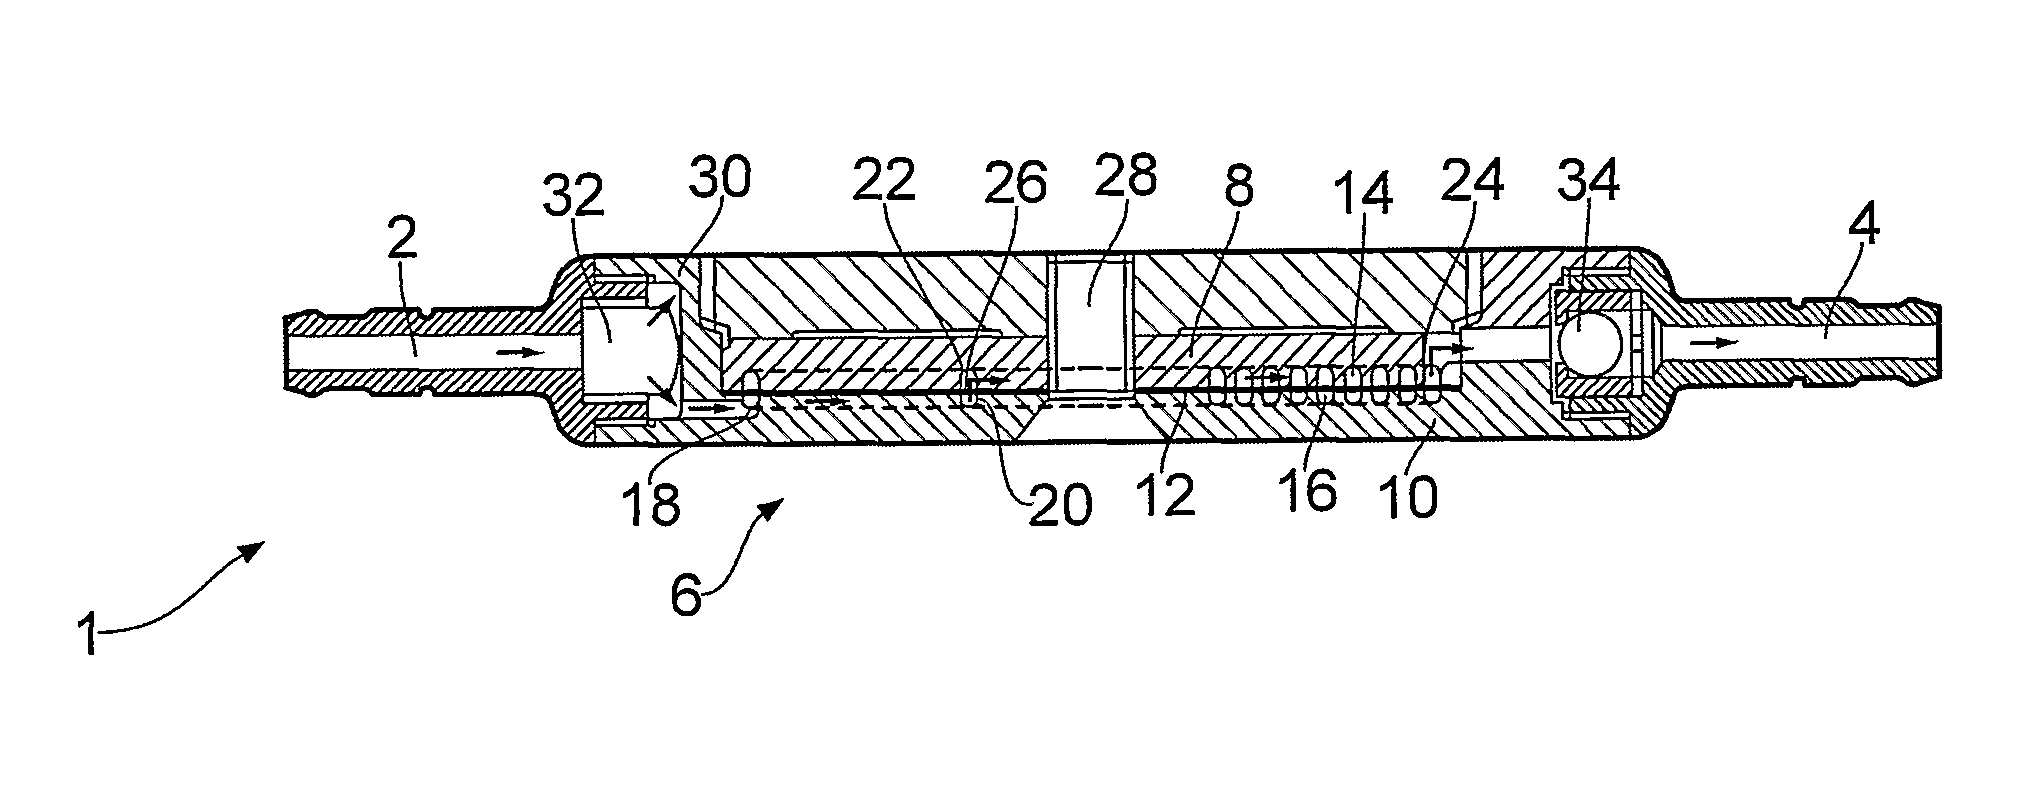 Device for controlling the rate of flow of a fluid